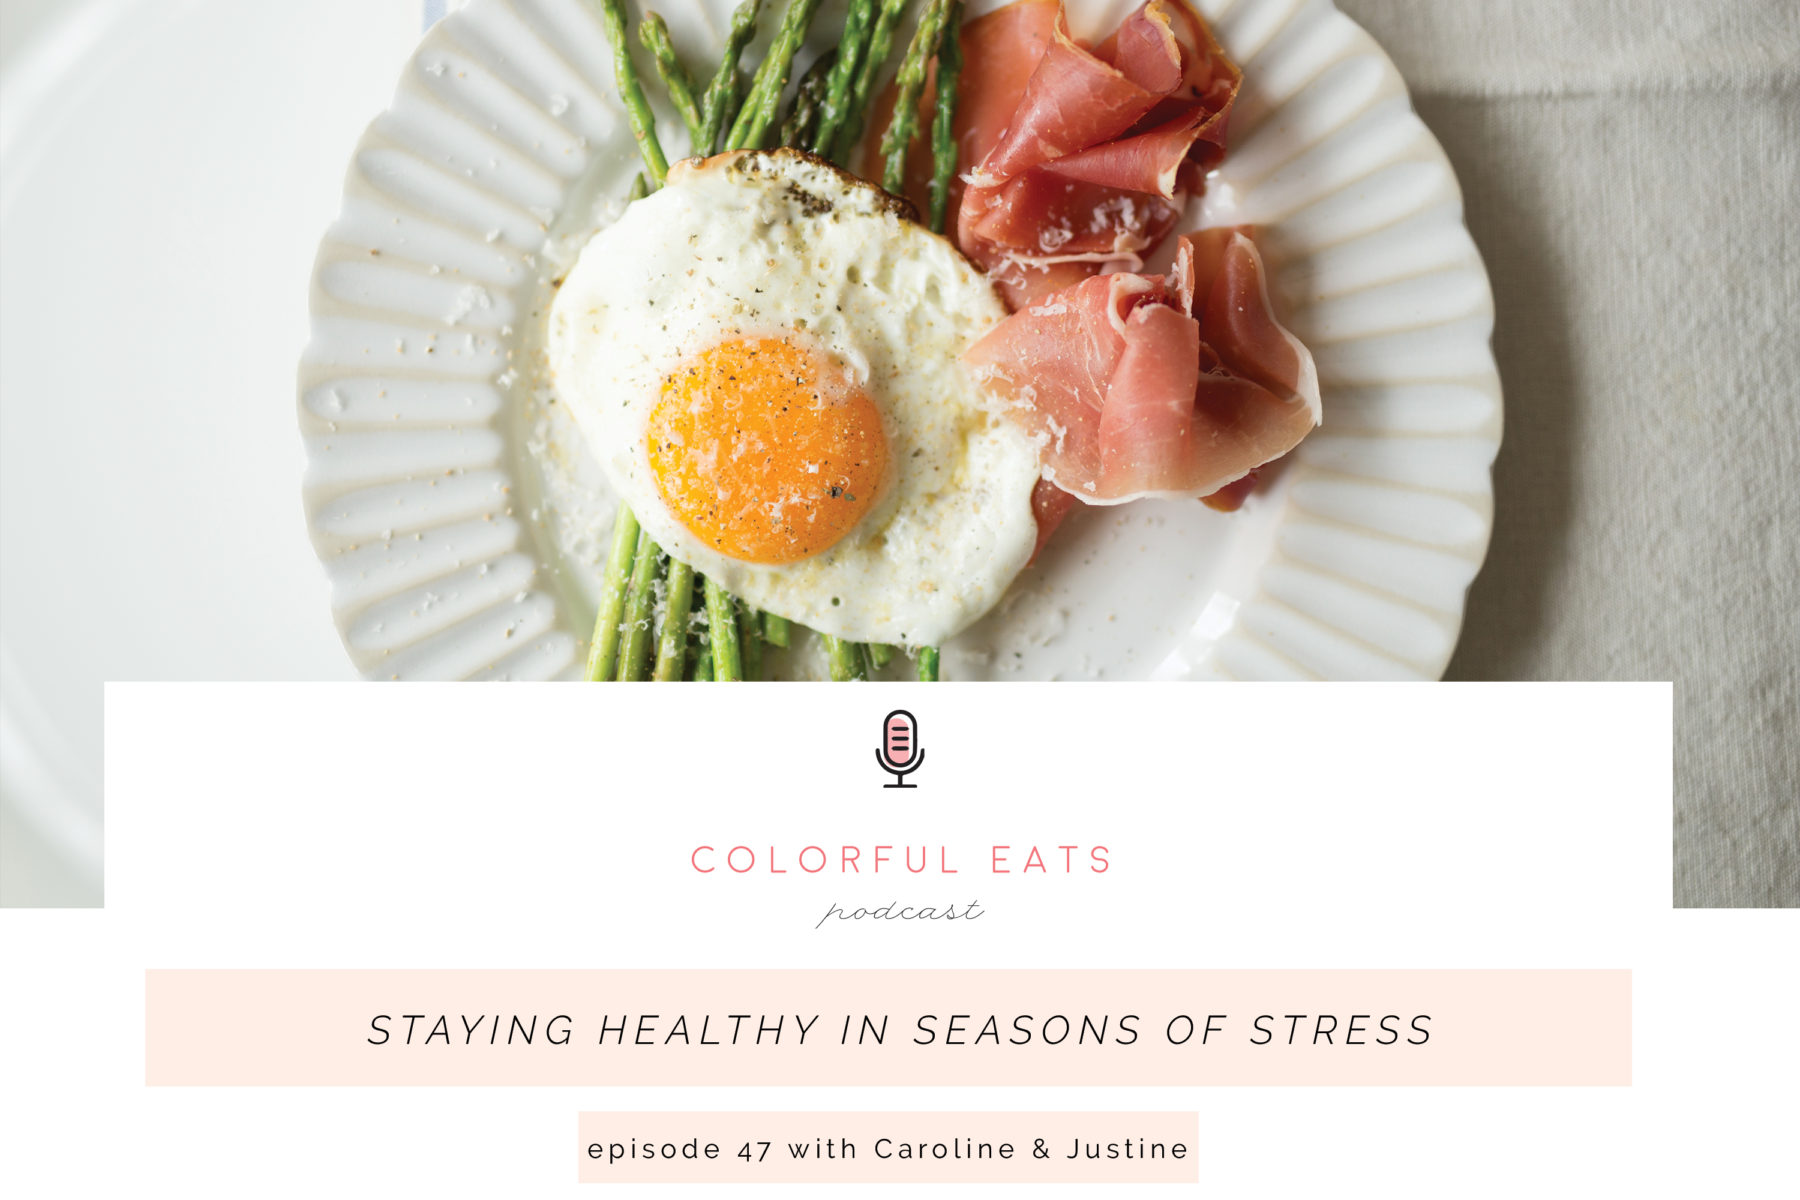 Colorful Eats Podcast Episode 47: Staying Healthy in Seasons of Stress